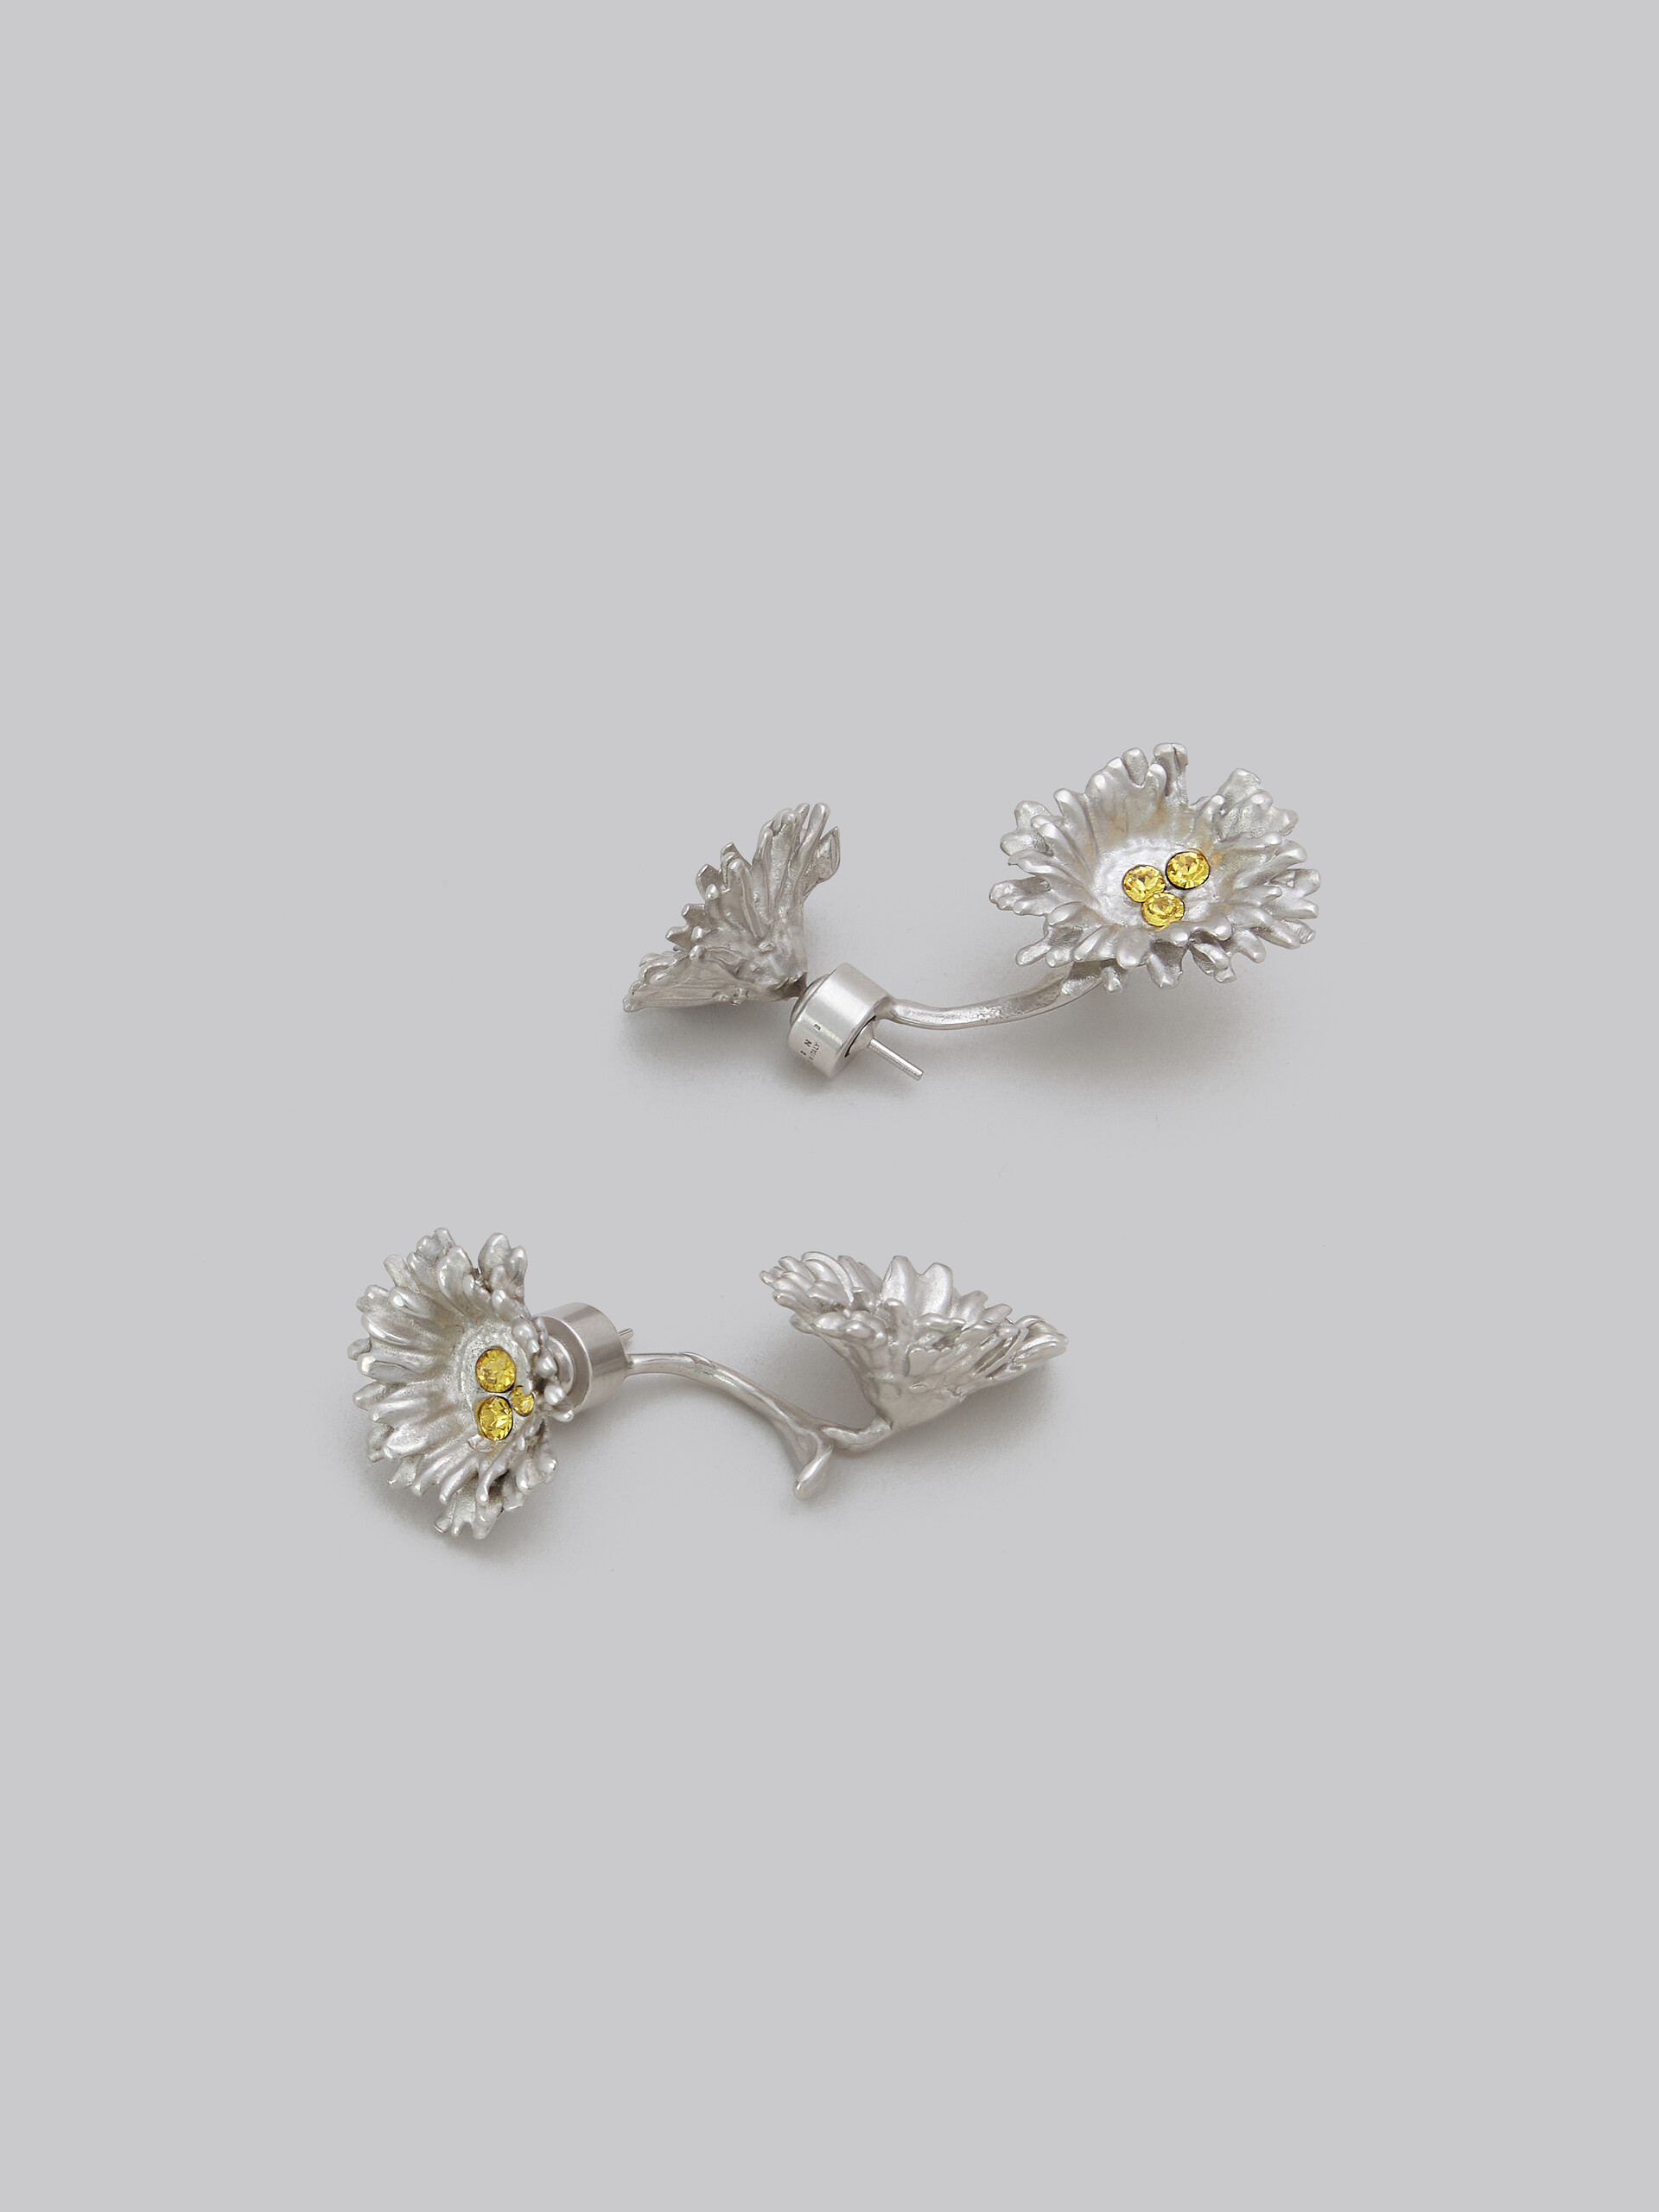 Metal daisy earrings with crystals - Earrings - Image 4